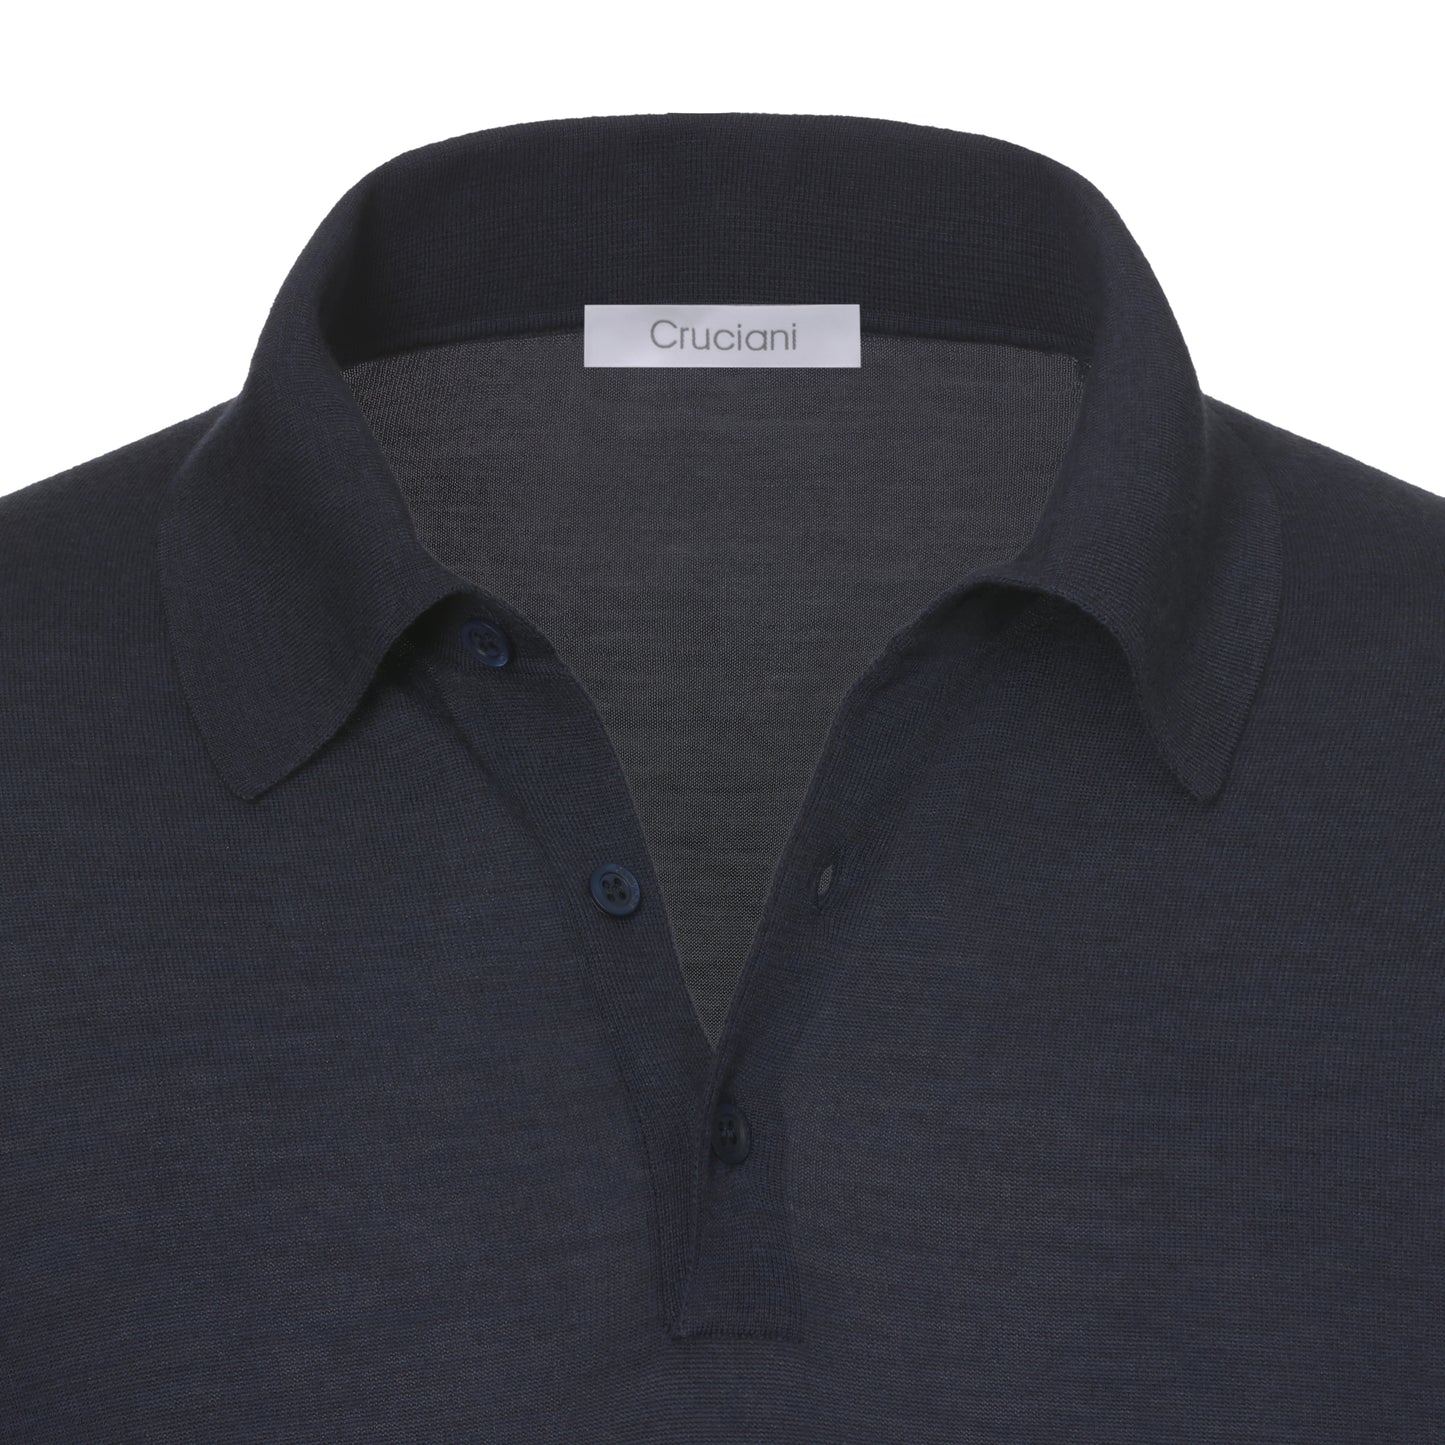 Wool Sweater Polo Shirt in Dark Blue Suit